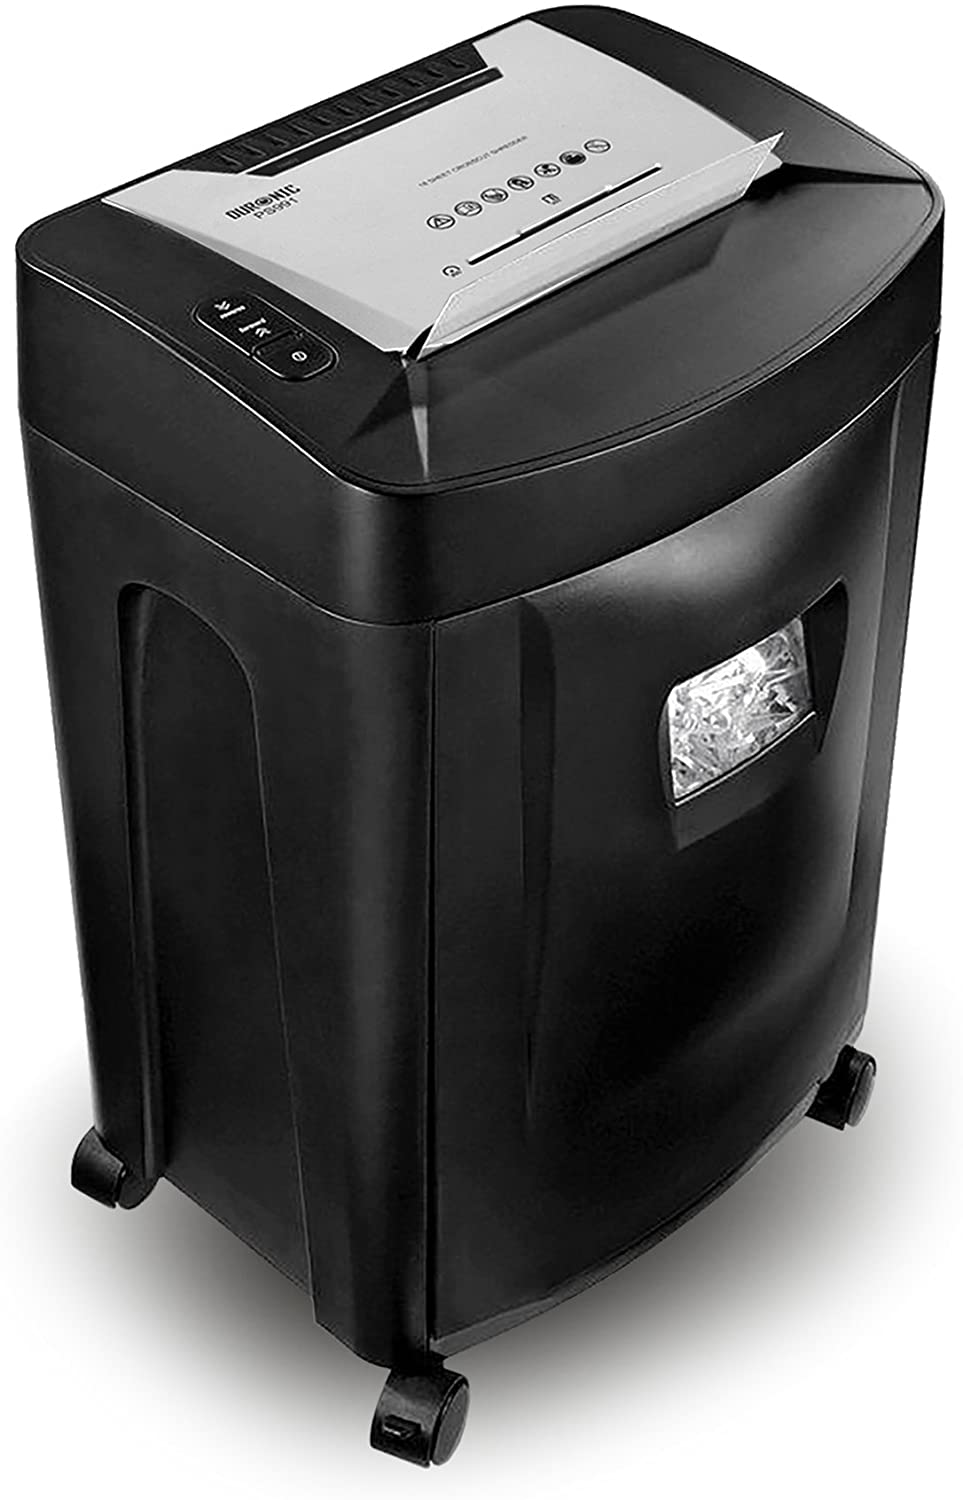 Duronic Paper Shredder PS991, 18 X A4 Sheets at a Time, Destroys Credit Cards & CDs , Electric Best Shredder For Home